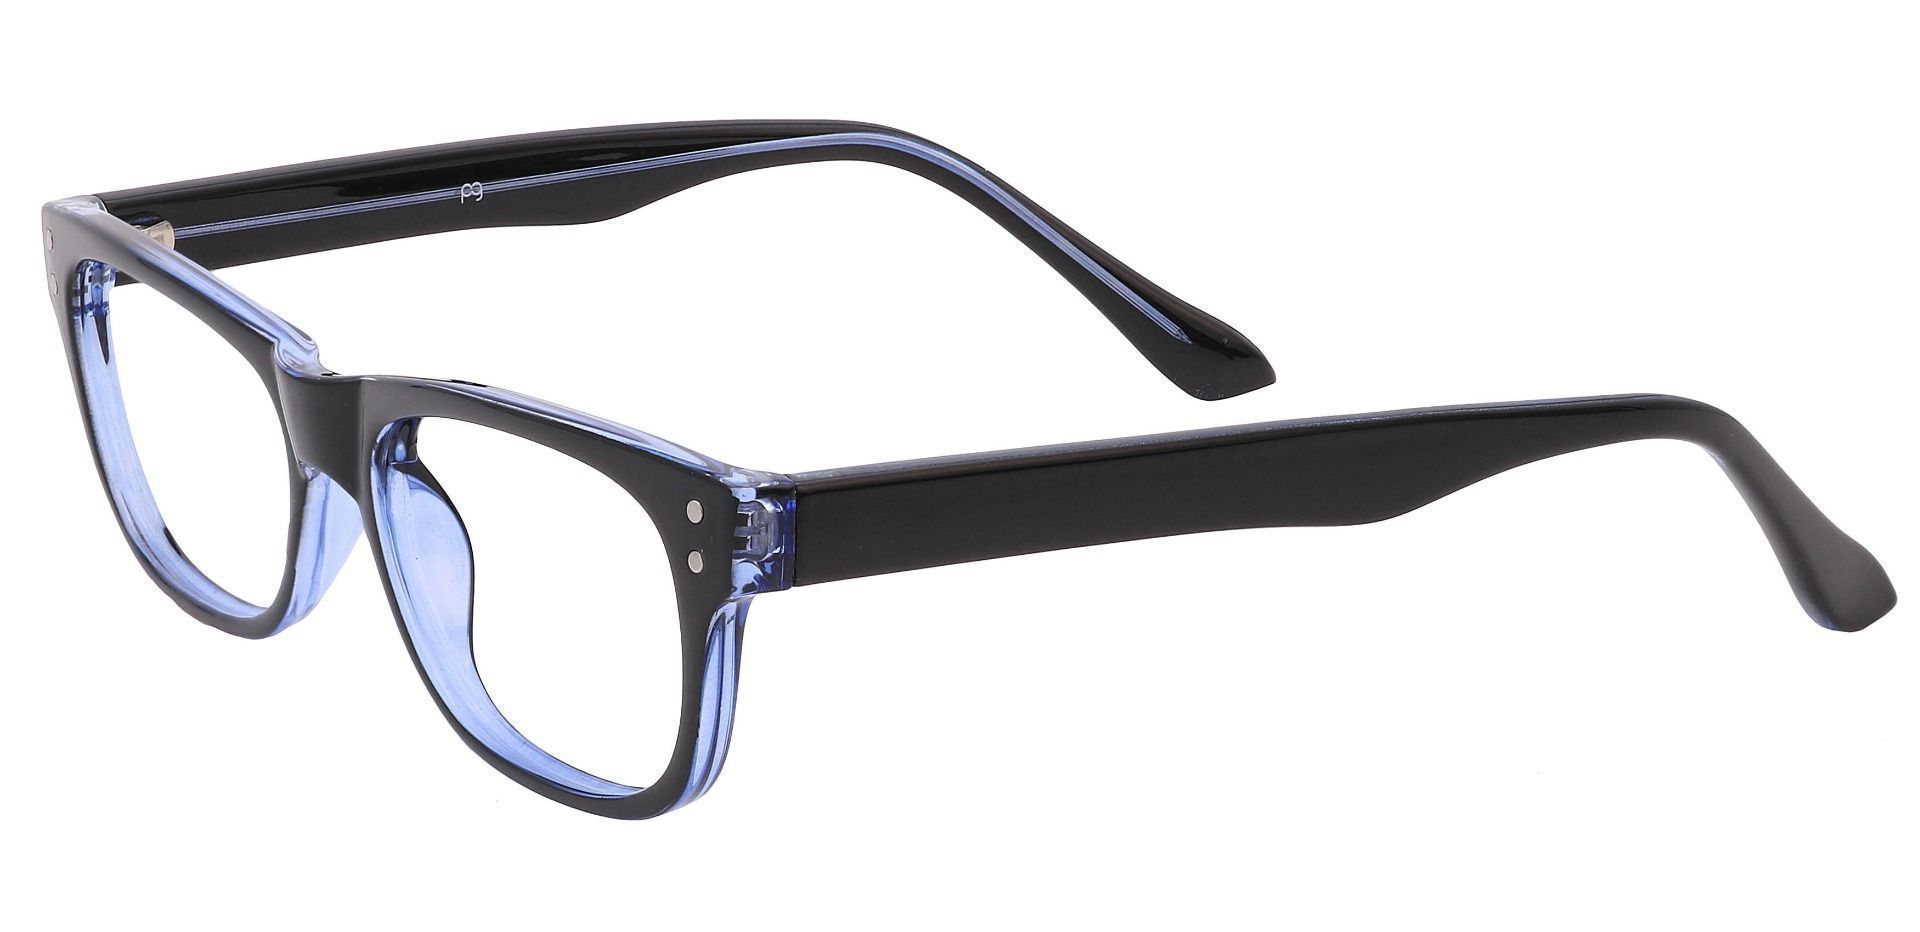 Murphy Rectangle Lined Bifocal Glasses - The Frame Is Blue And Black